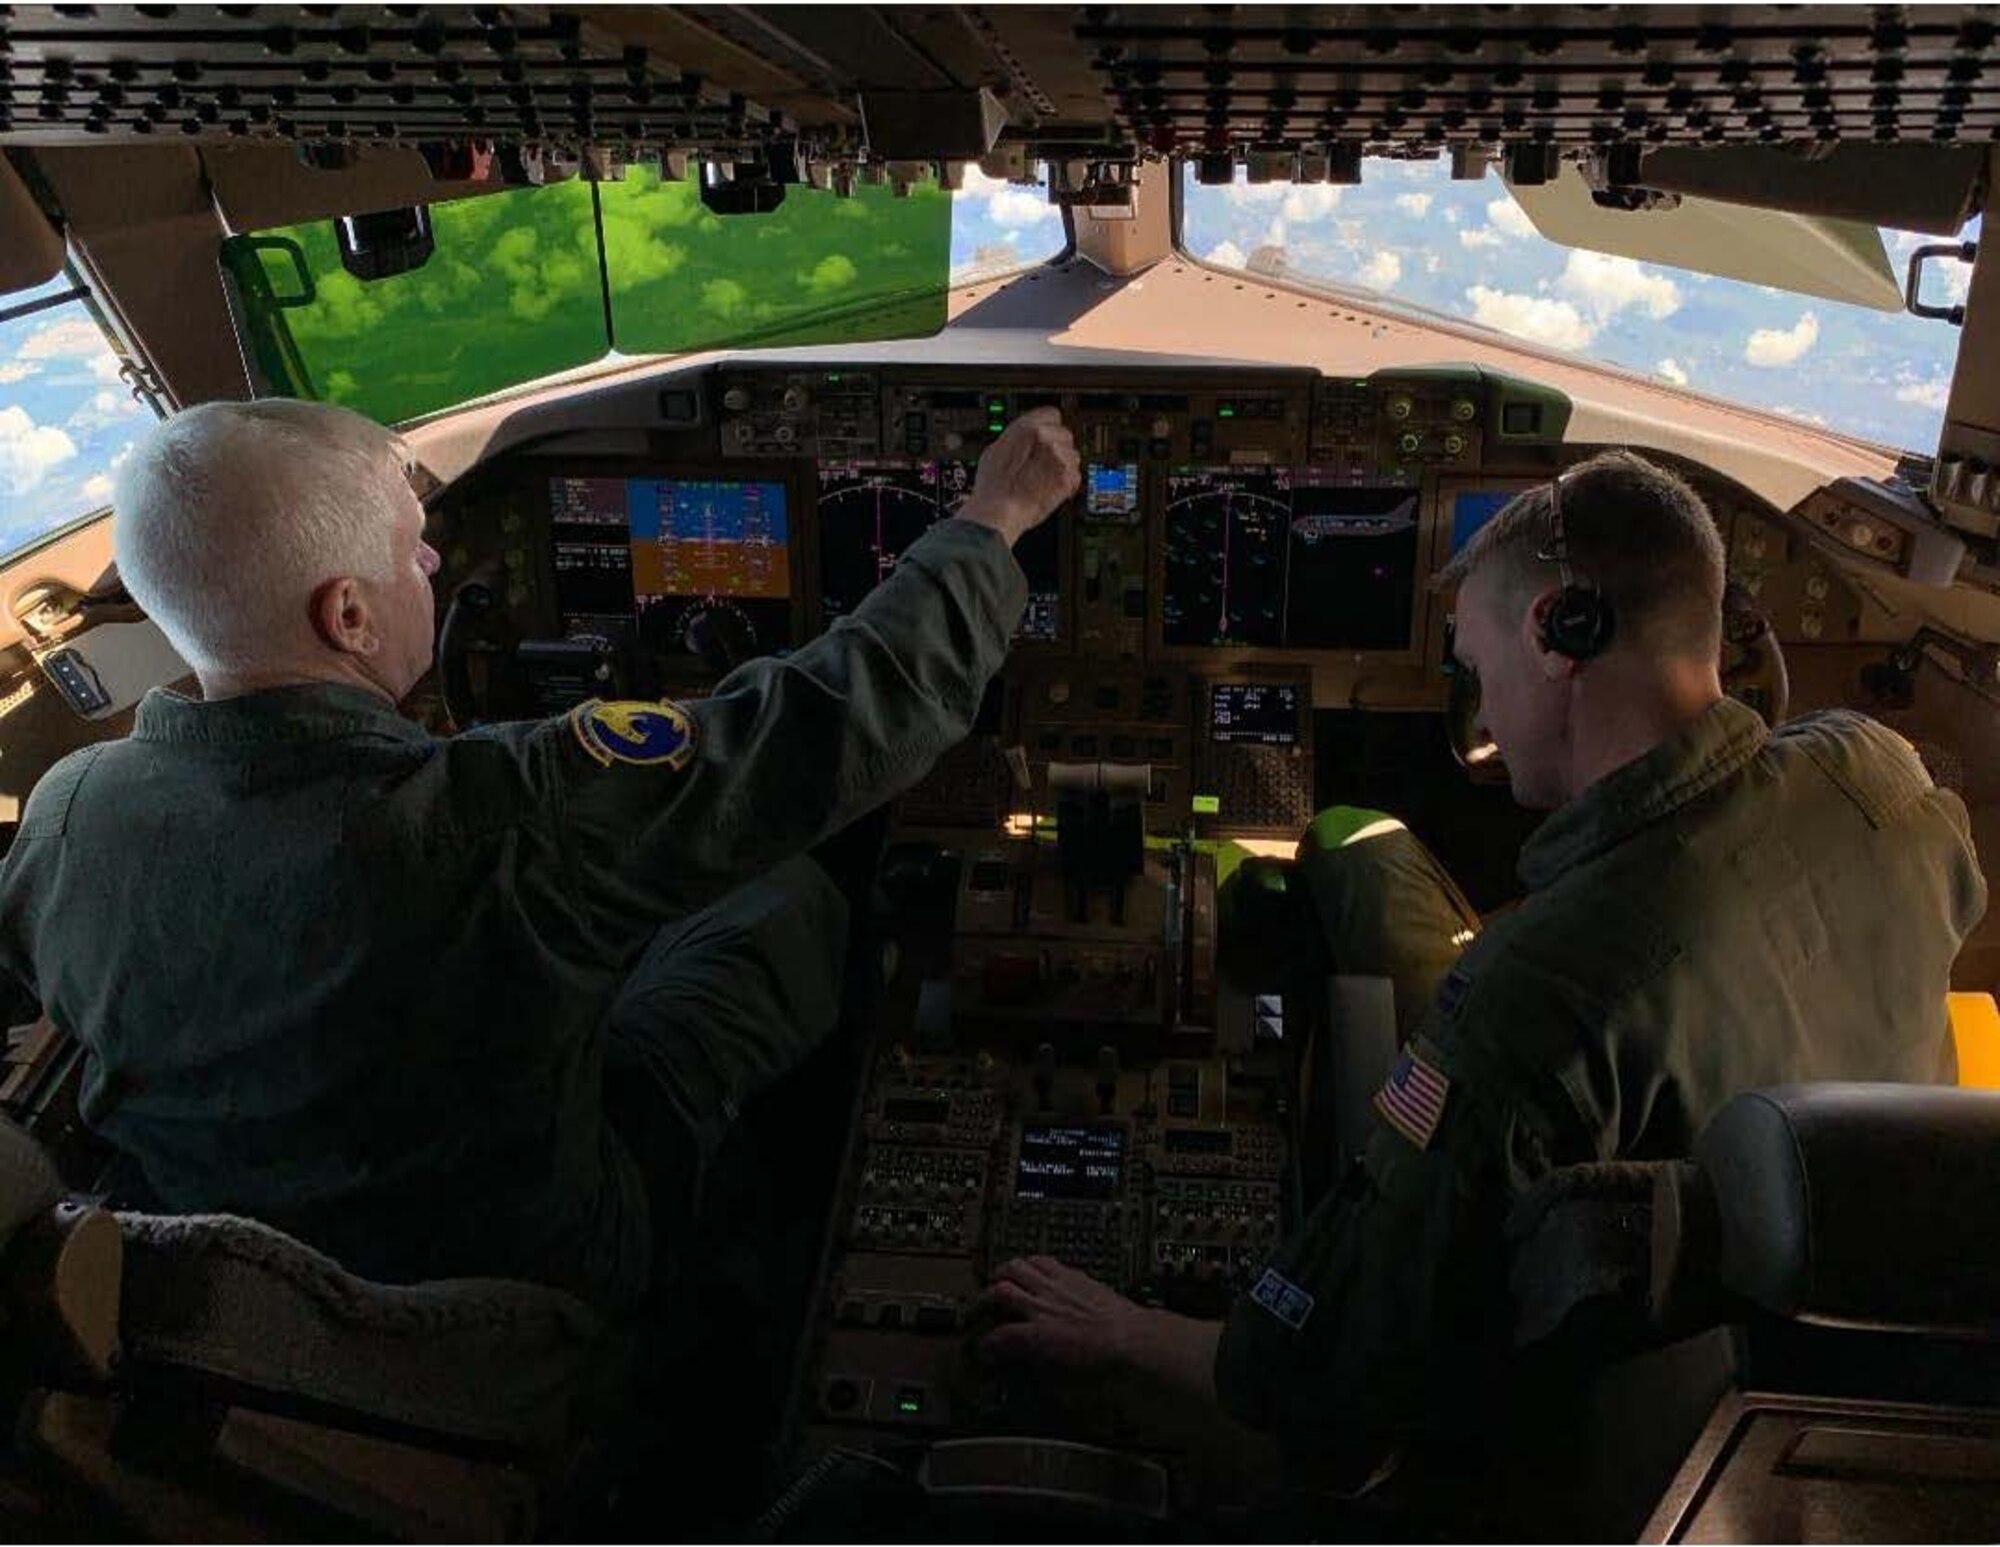 U.S. Air Force Lt. Gen. L. Scott Rice, left, director of the Air National Guard, and U.S. Air Force Capt. Lee
Rice, right, a pilot assigned to the 157th Air Refueling Wing, Pease Air National Guard Base, New
Hampshire, fly a KC-46A Pegasus Aug. 8, 2019. This KC-46 was flown by the Rice father-and-son duo to
the aircraft’s newly assigned home station at the 157th ARW. (U.S. Air National Guard photo by Staff
Sgt. Morgan R. Lipinski)